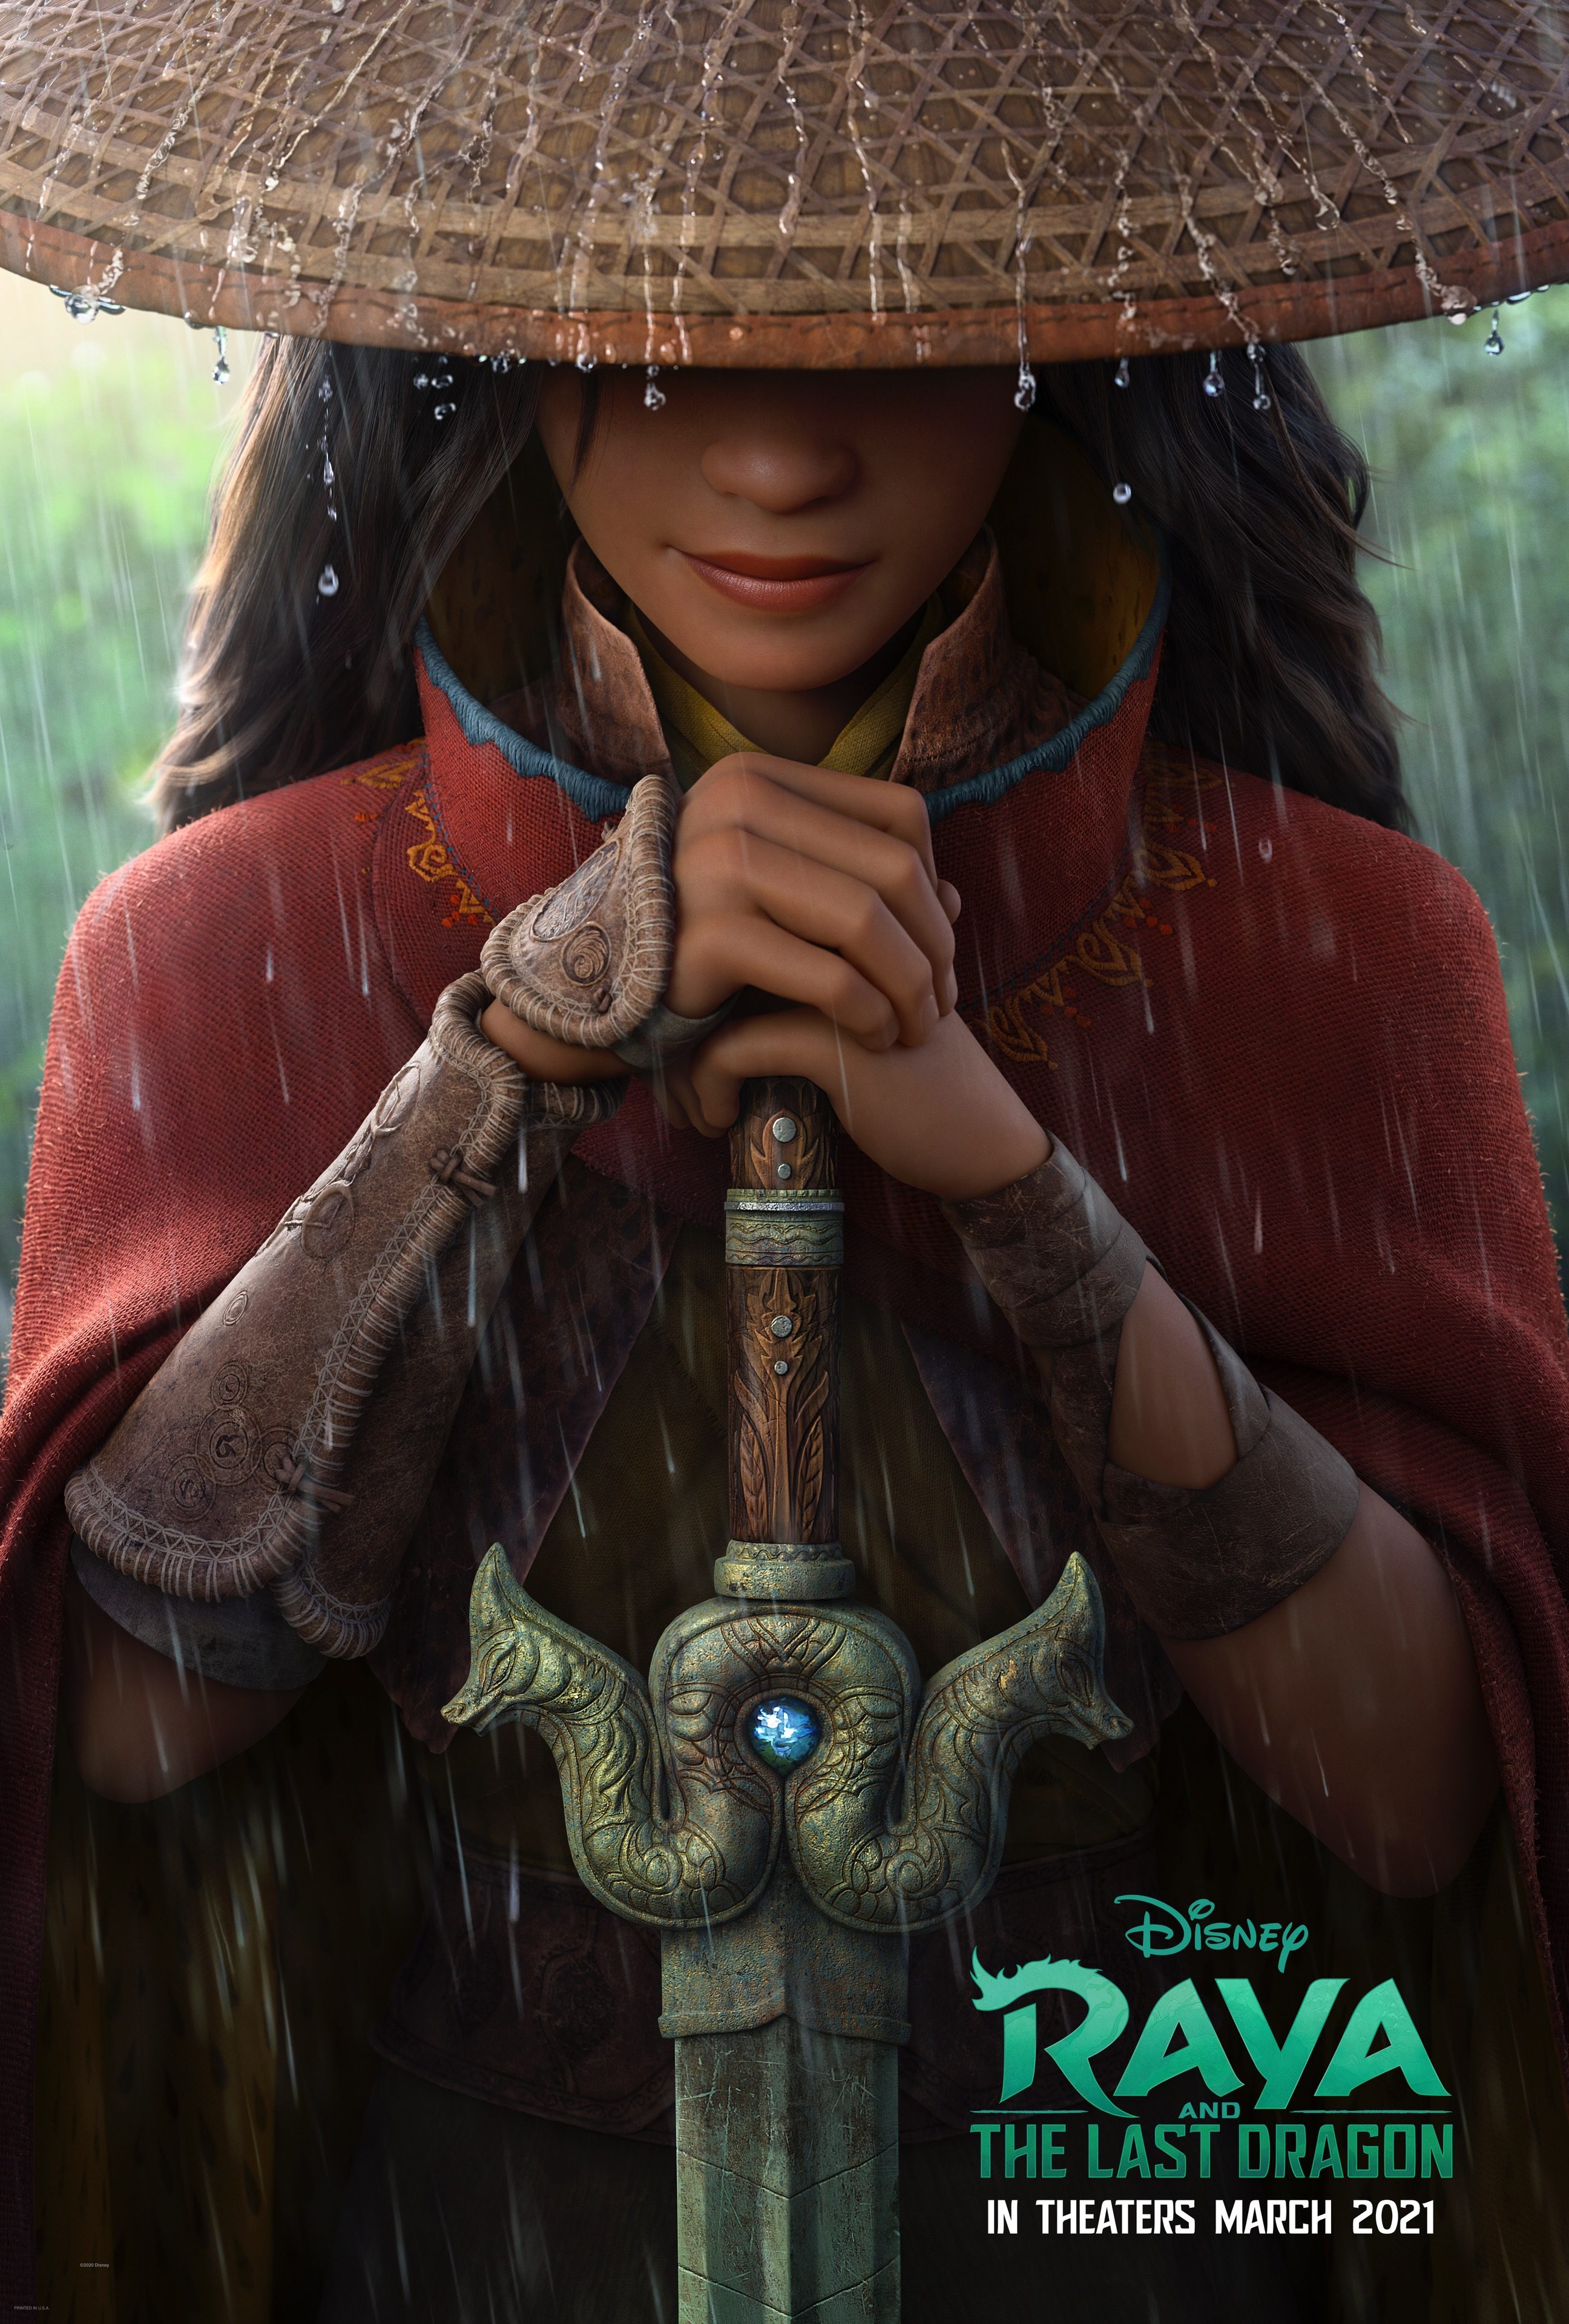 LOOK Disney unveils poster for ‘Raya and The Last Dragon’